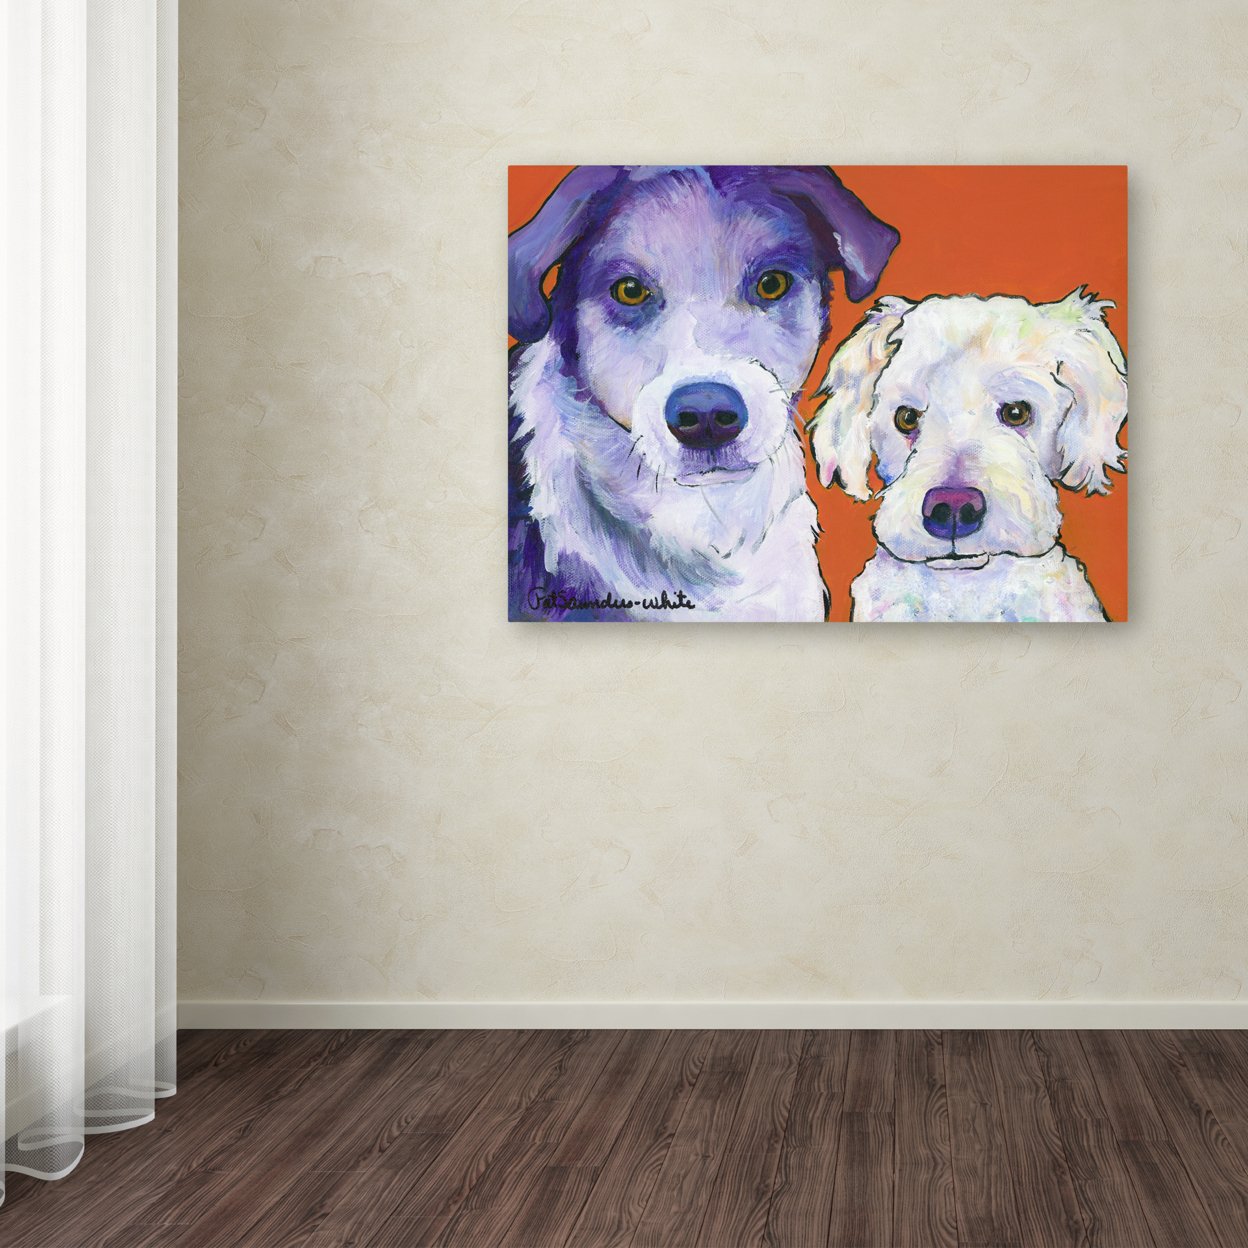 Pat Saunders-White 'Milo And Max' Canvas Art 18 X 24